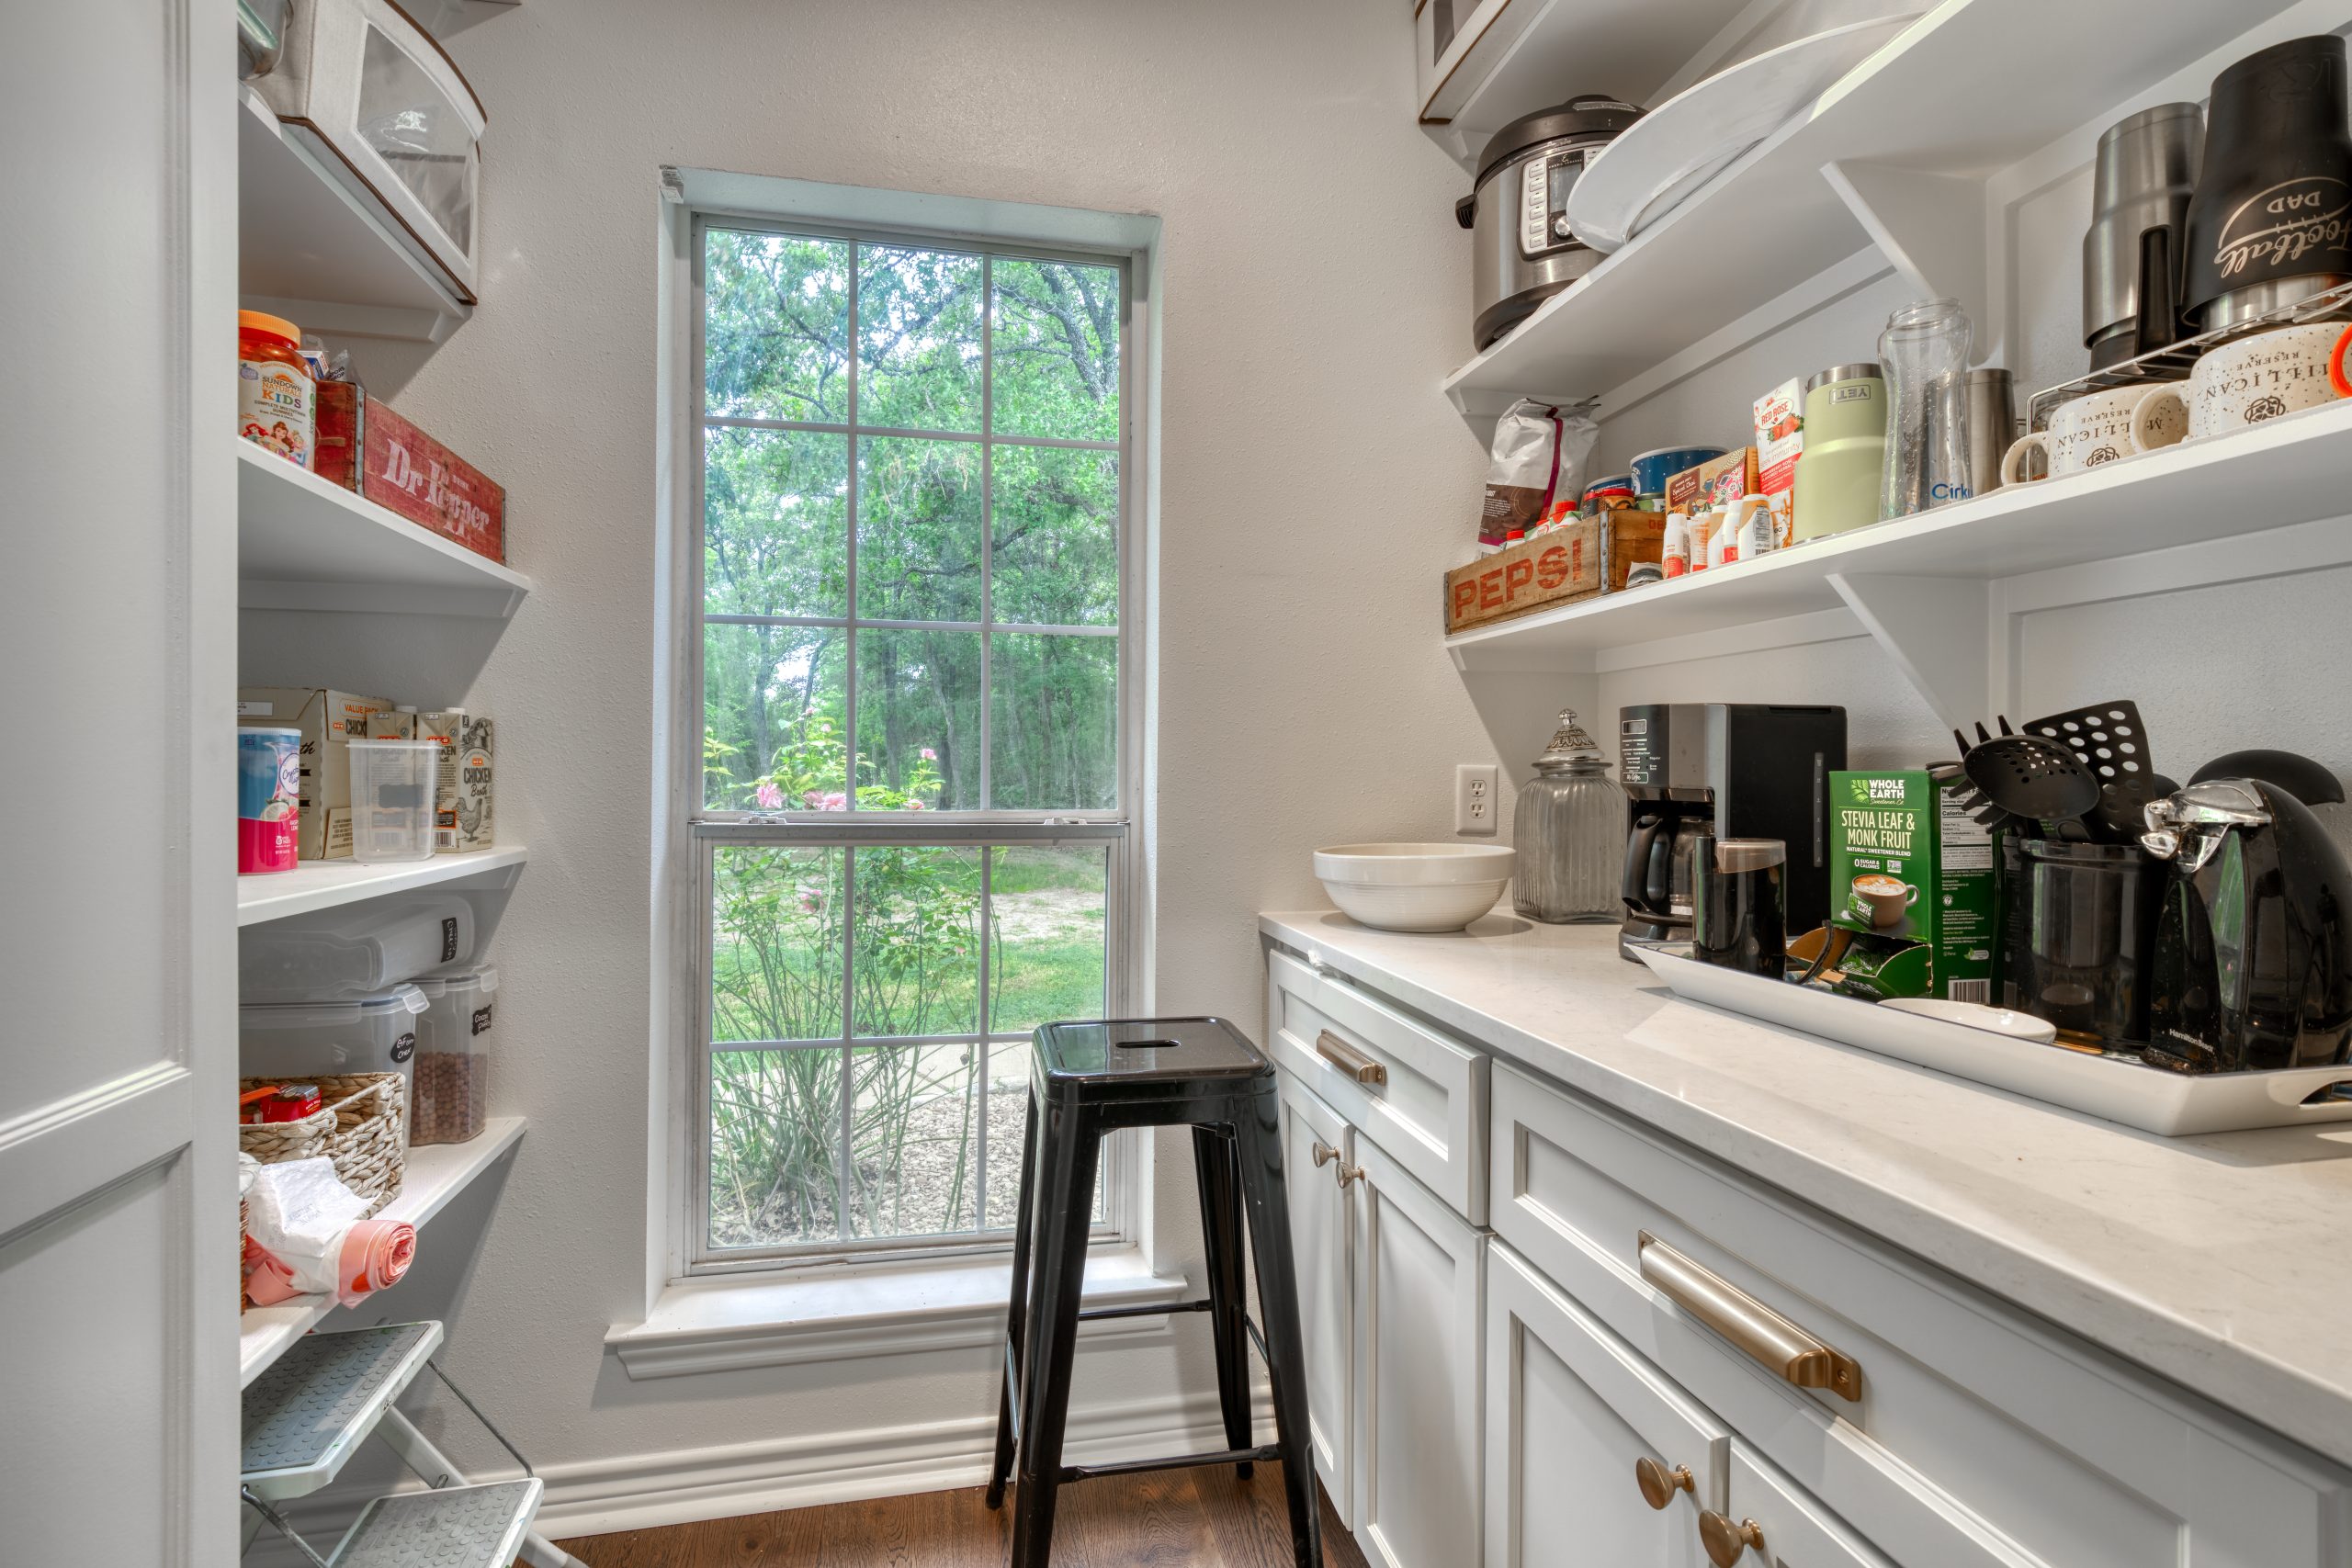 Good Company Construction in Bryan, Texas - Image of Pantry